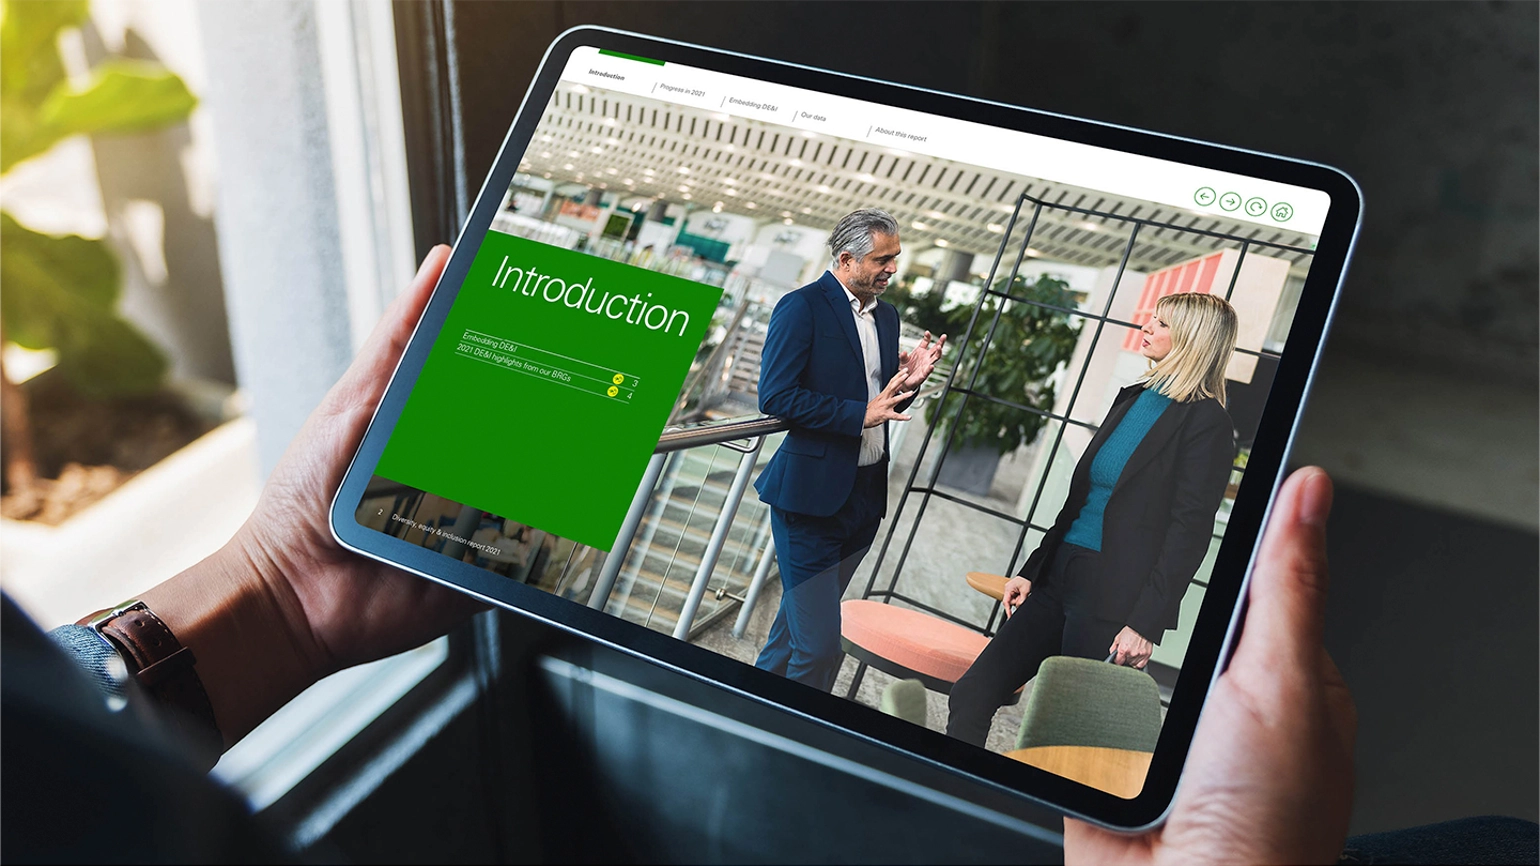 Example of report design within a tablet with an image of a man and a woman in conversation in the office on the right and then the title of introduction on the left